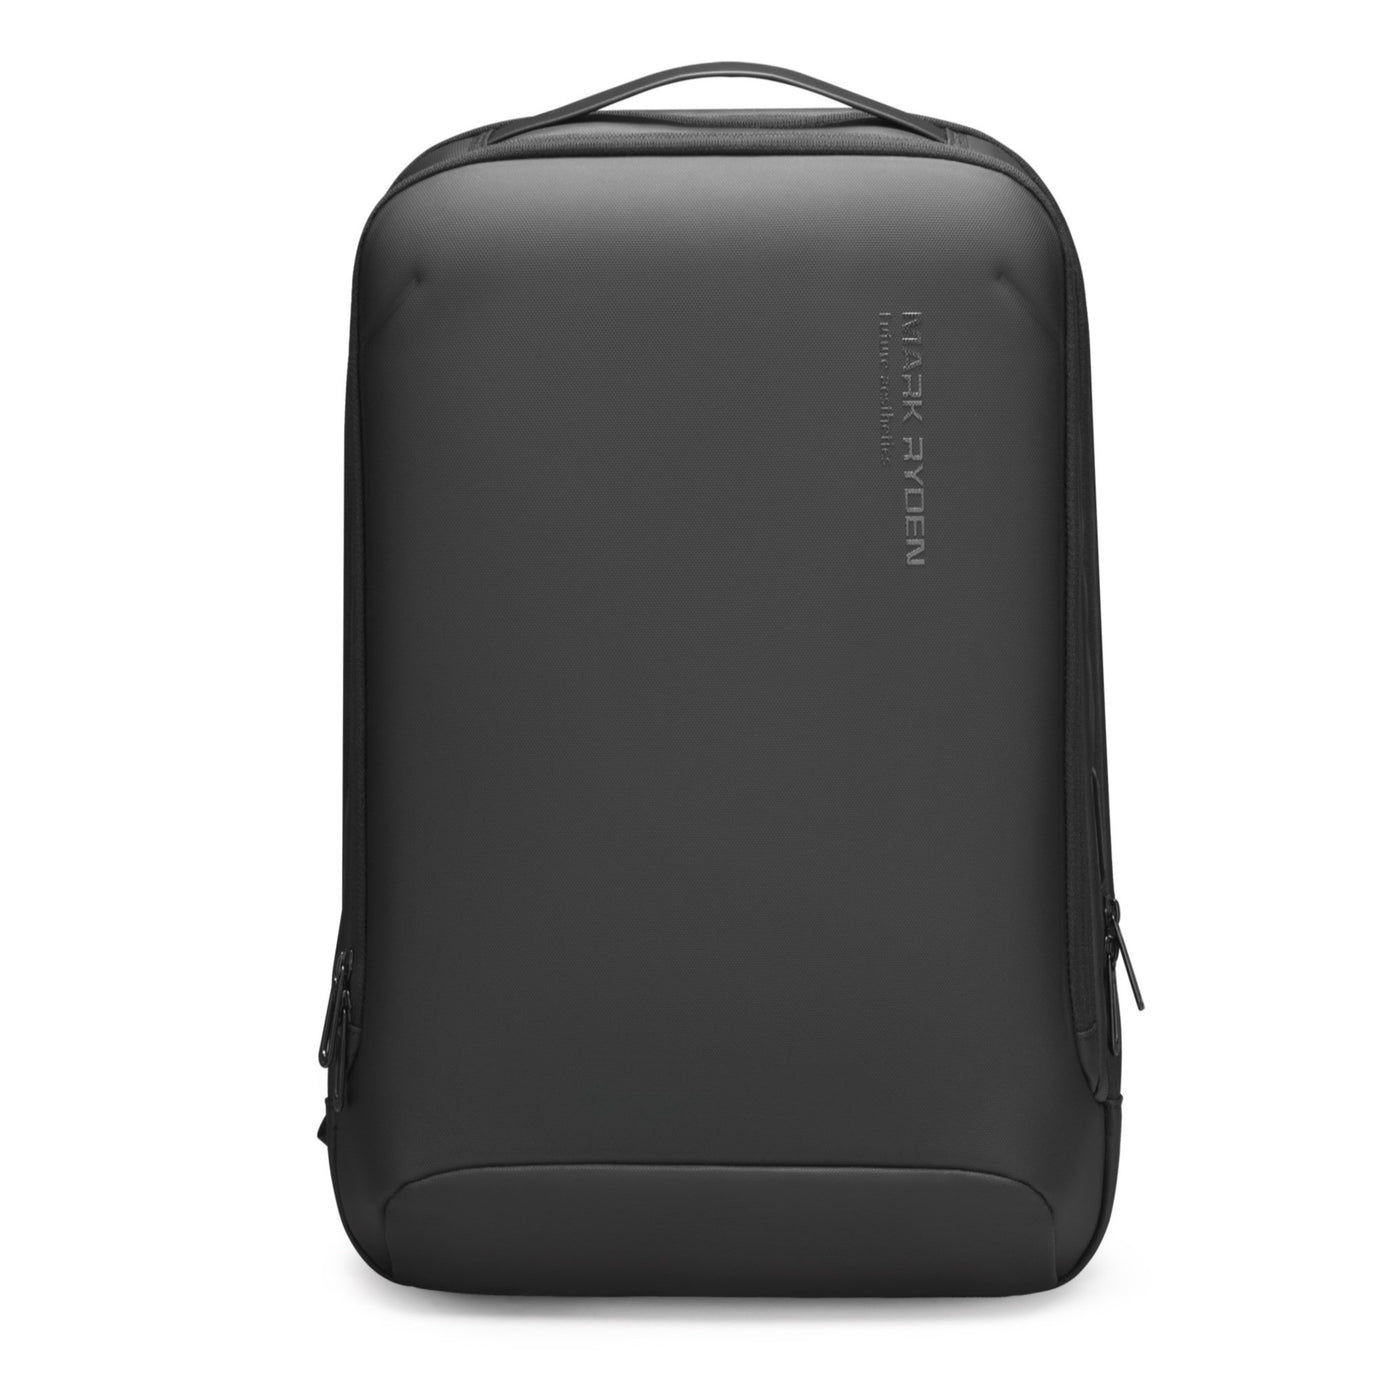 Mark Ryden Canada Campus Black Smart Laptop Backpack with USB and Micro Charging